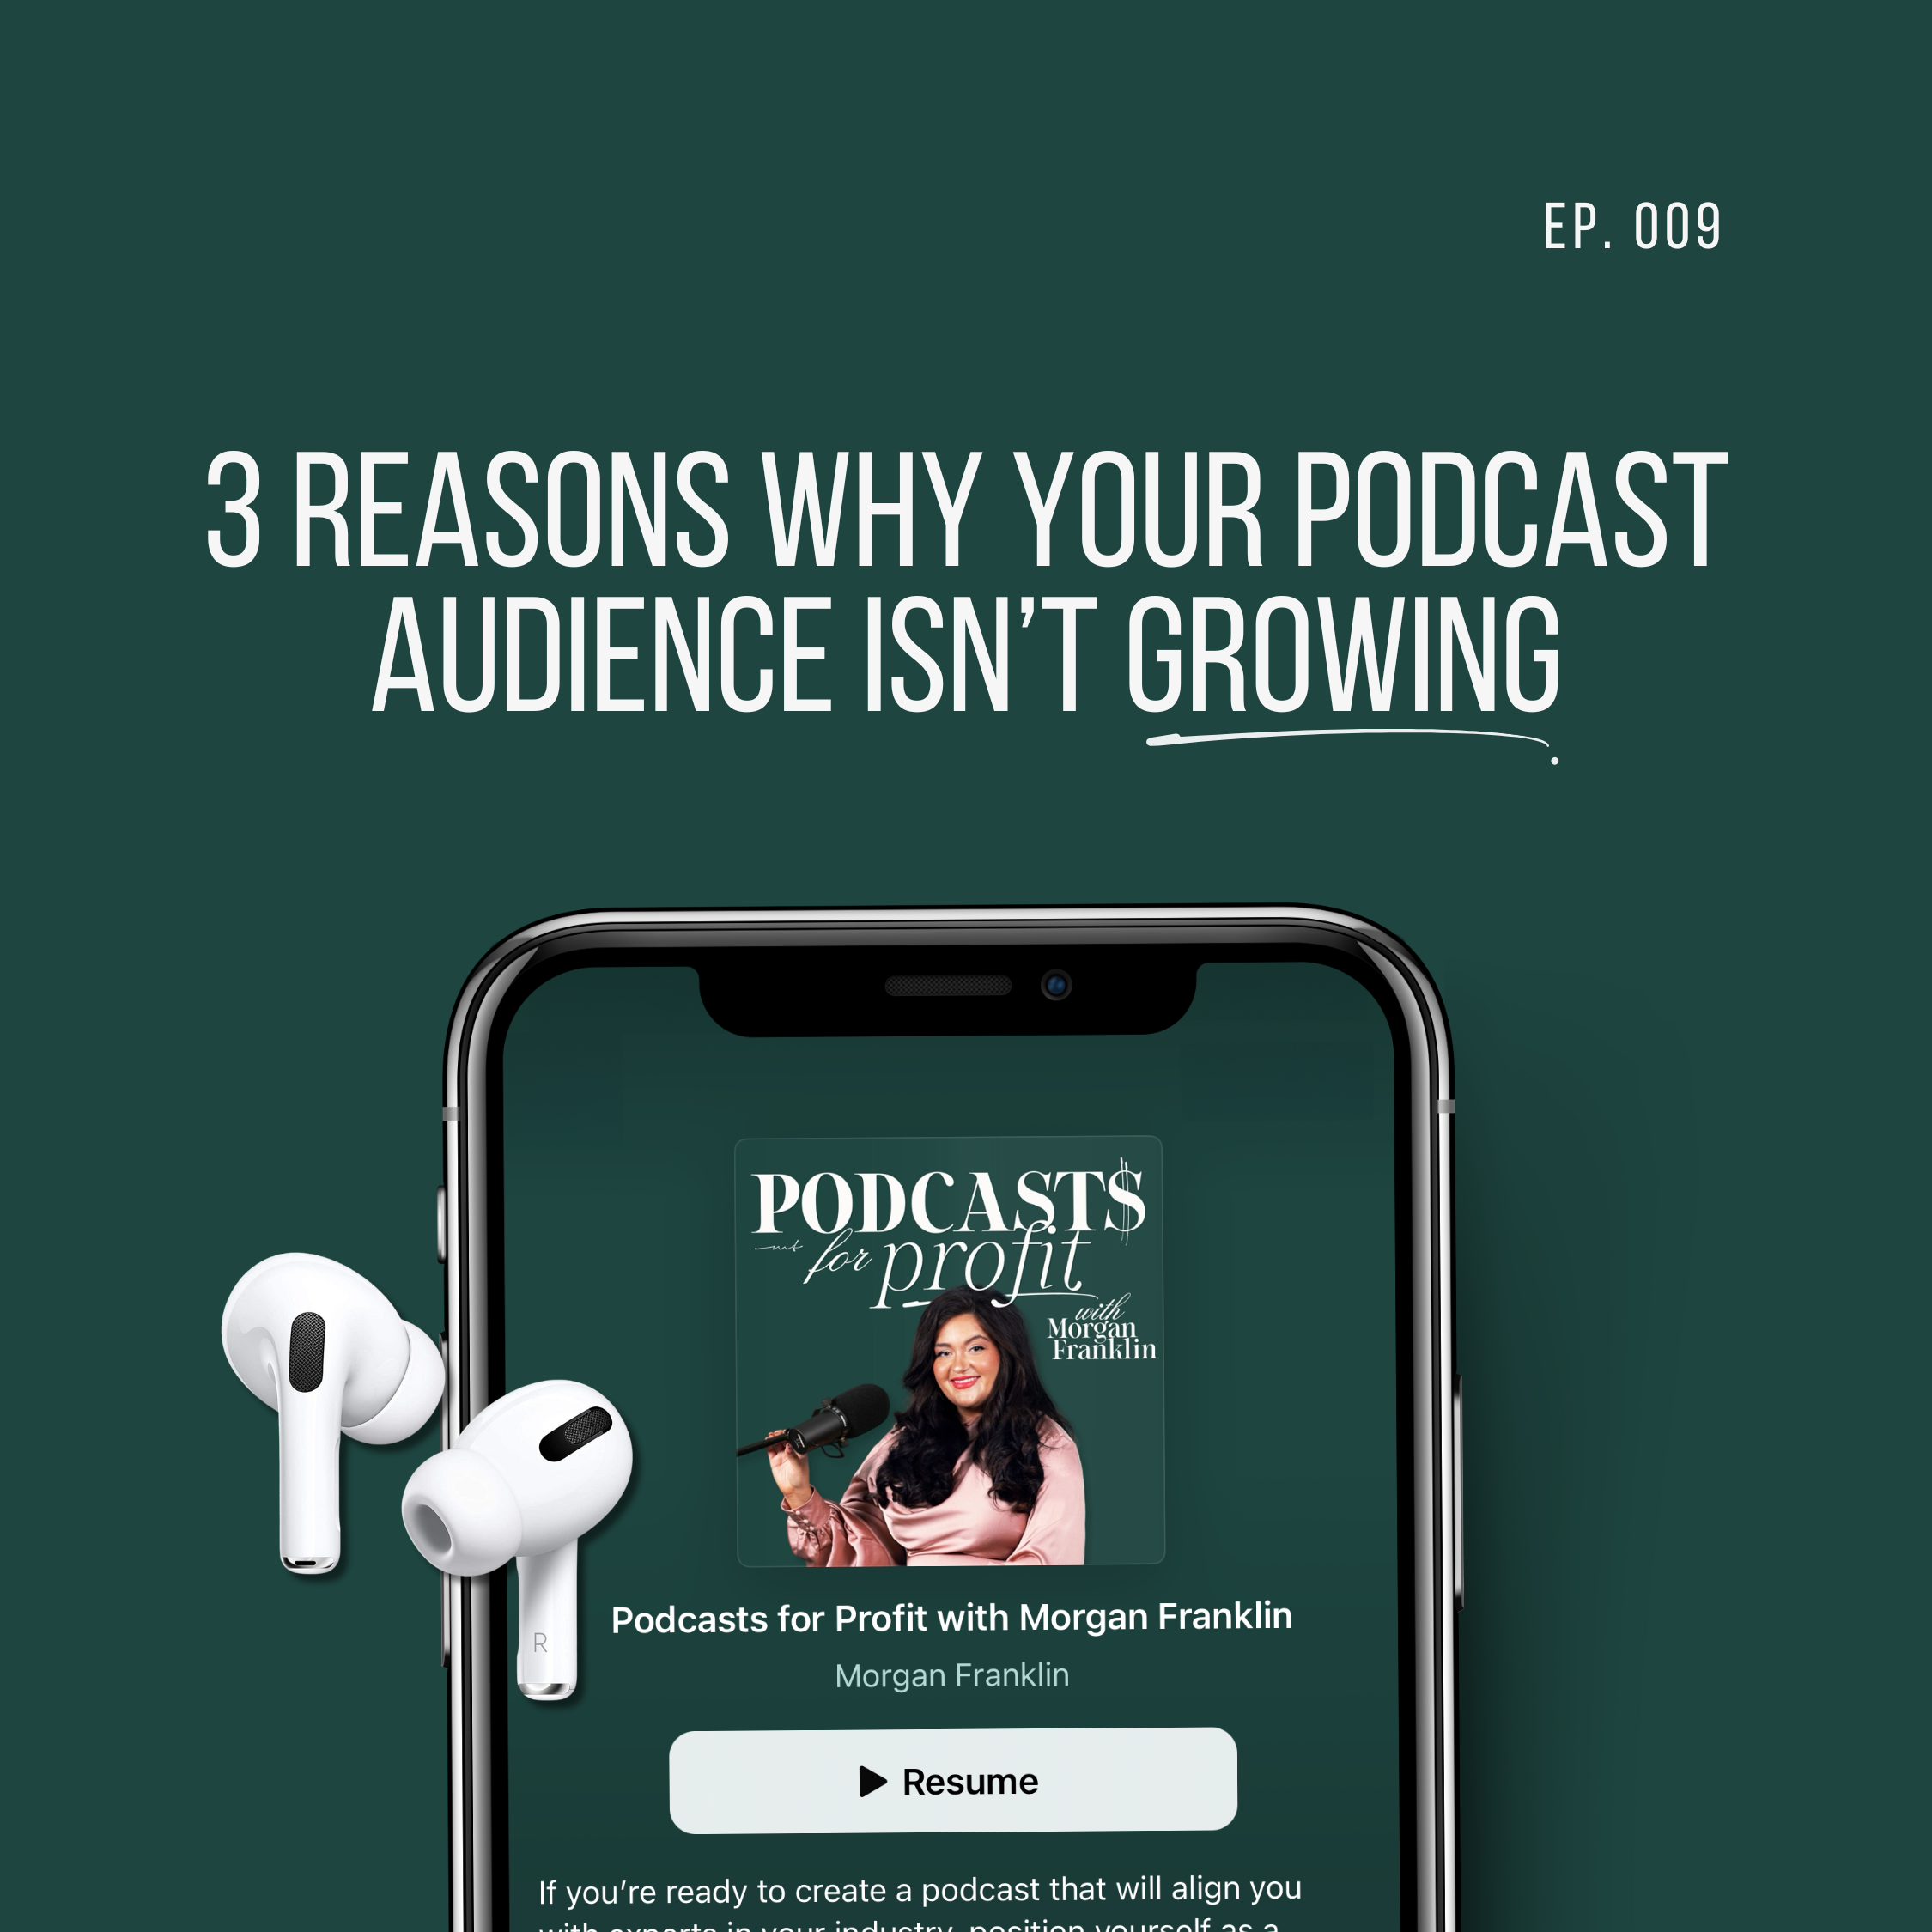 3 Reasons Why Your Podcast Audience isn't Growing